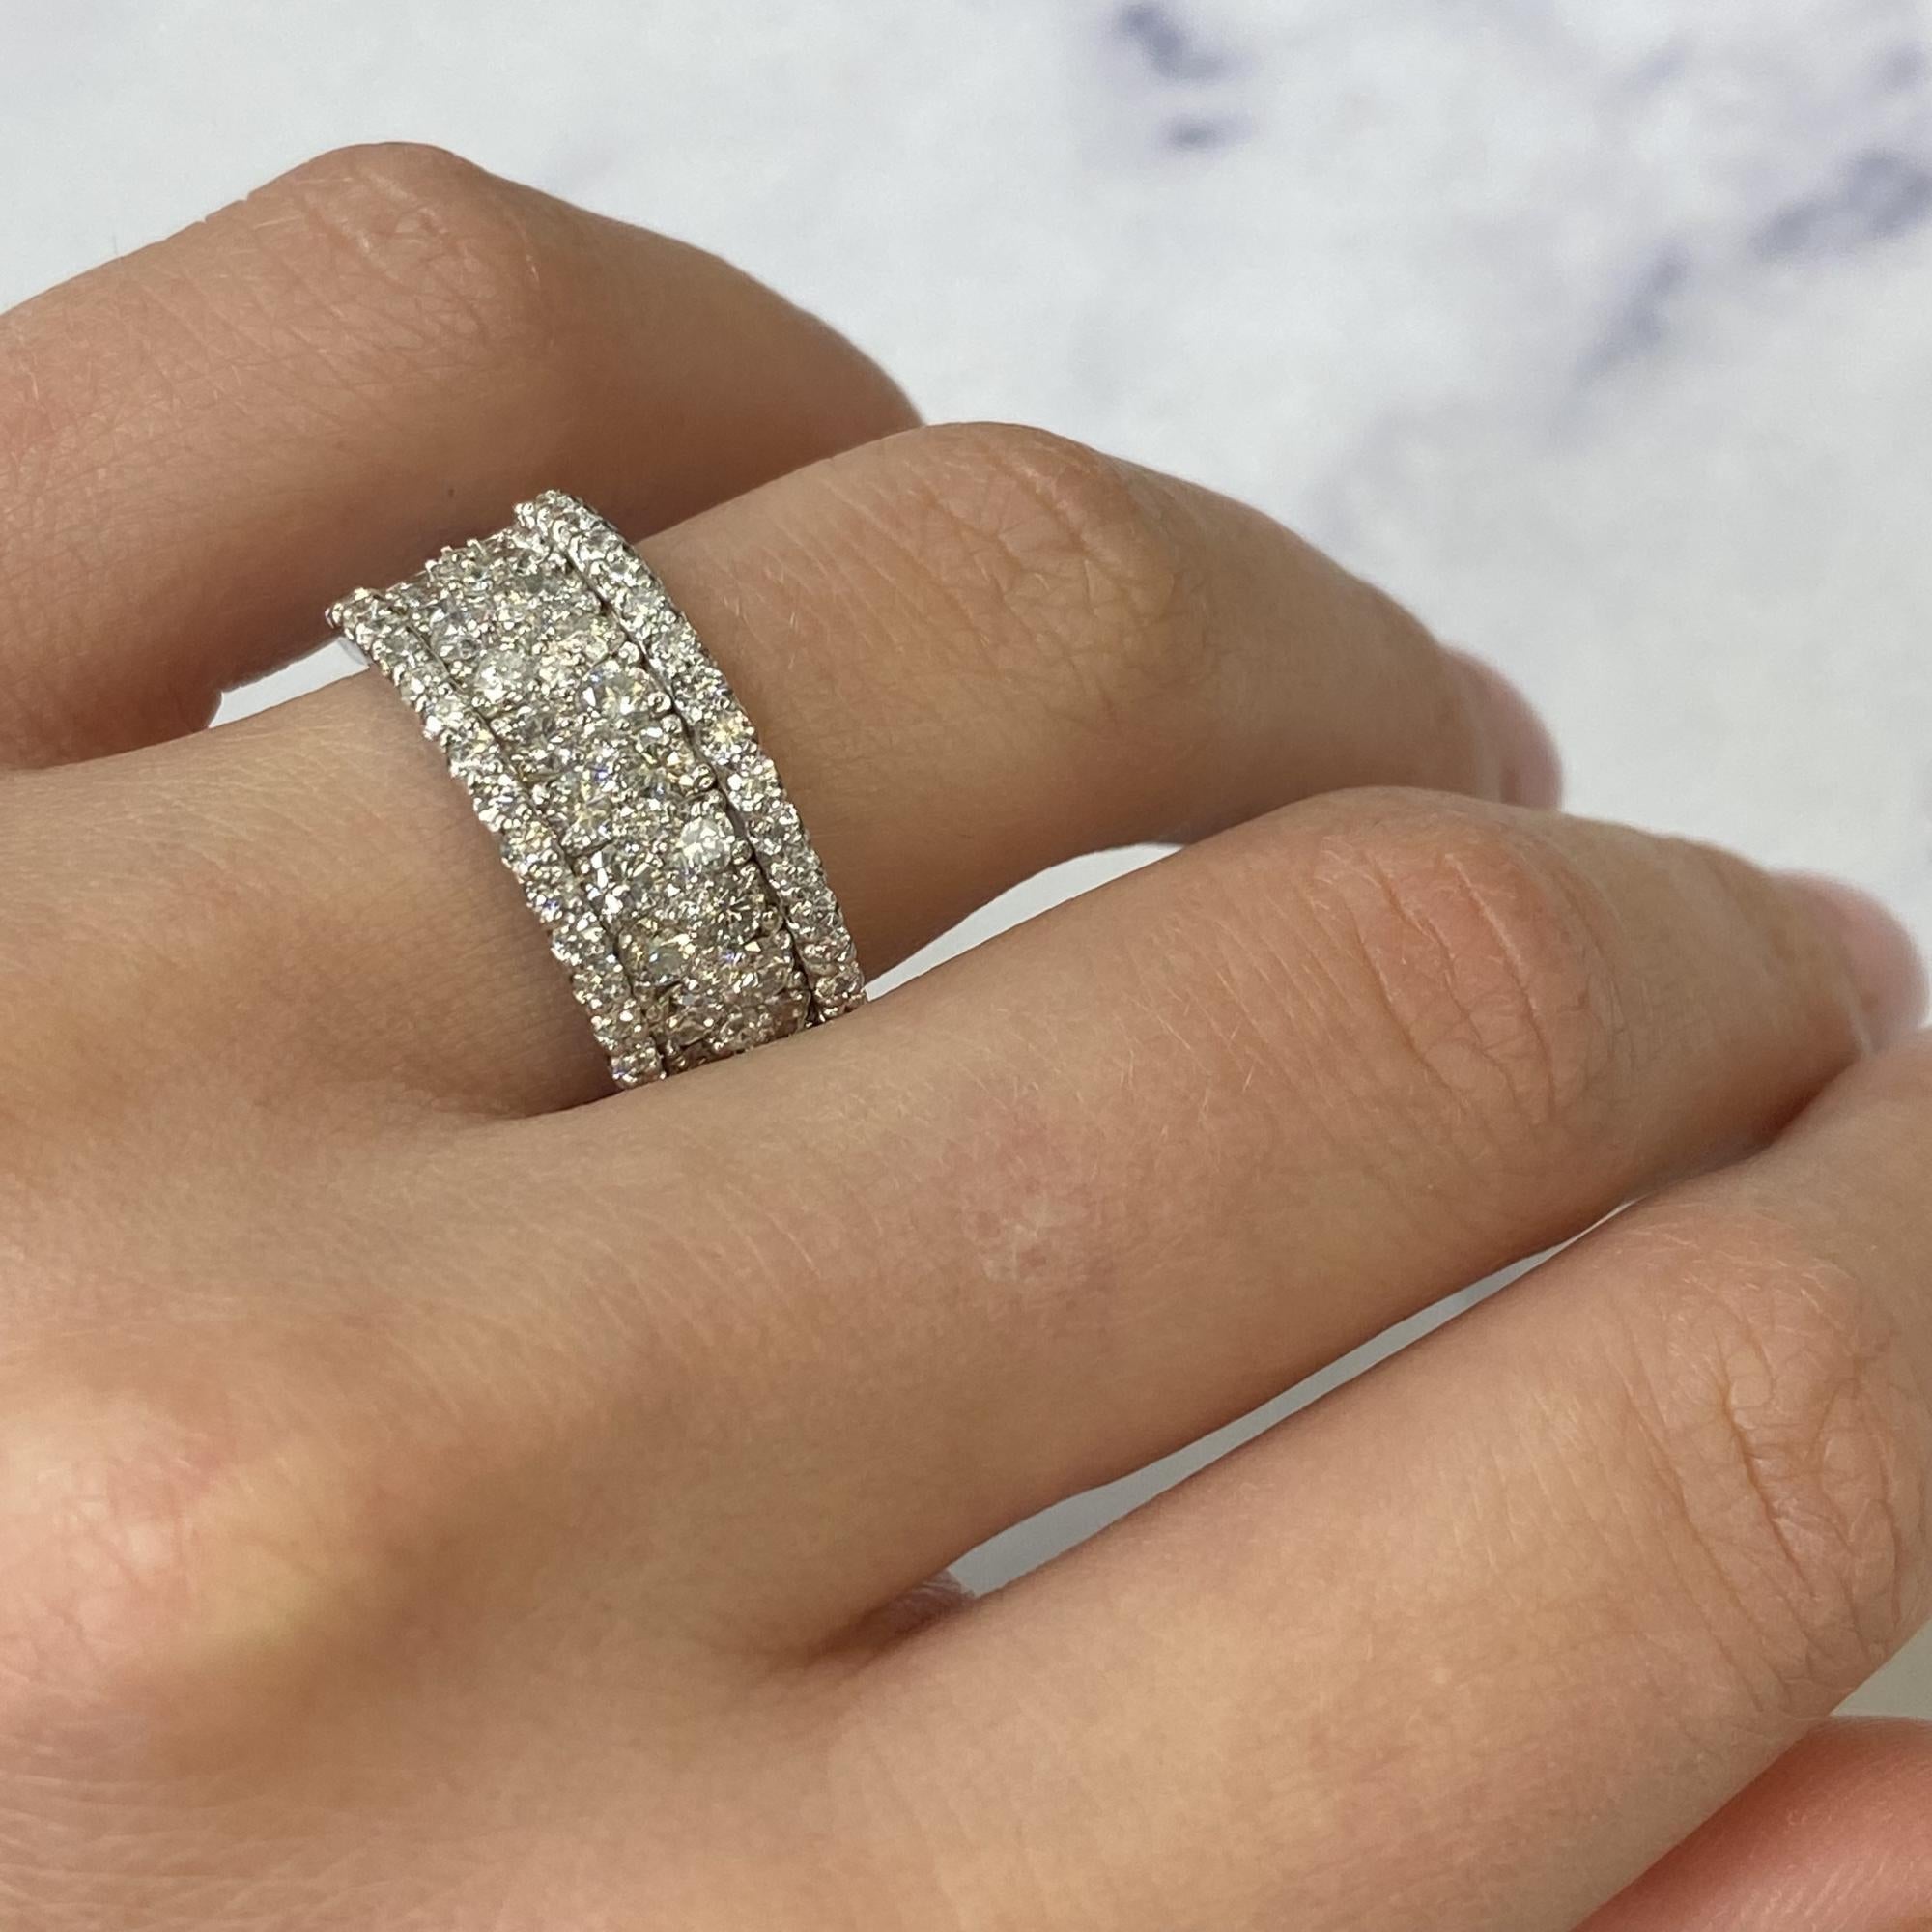 Rachel Koen Multi Row Round Diamond Ring 14K White Gold 2.15cttw In New Condition For Sale In New York, NY